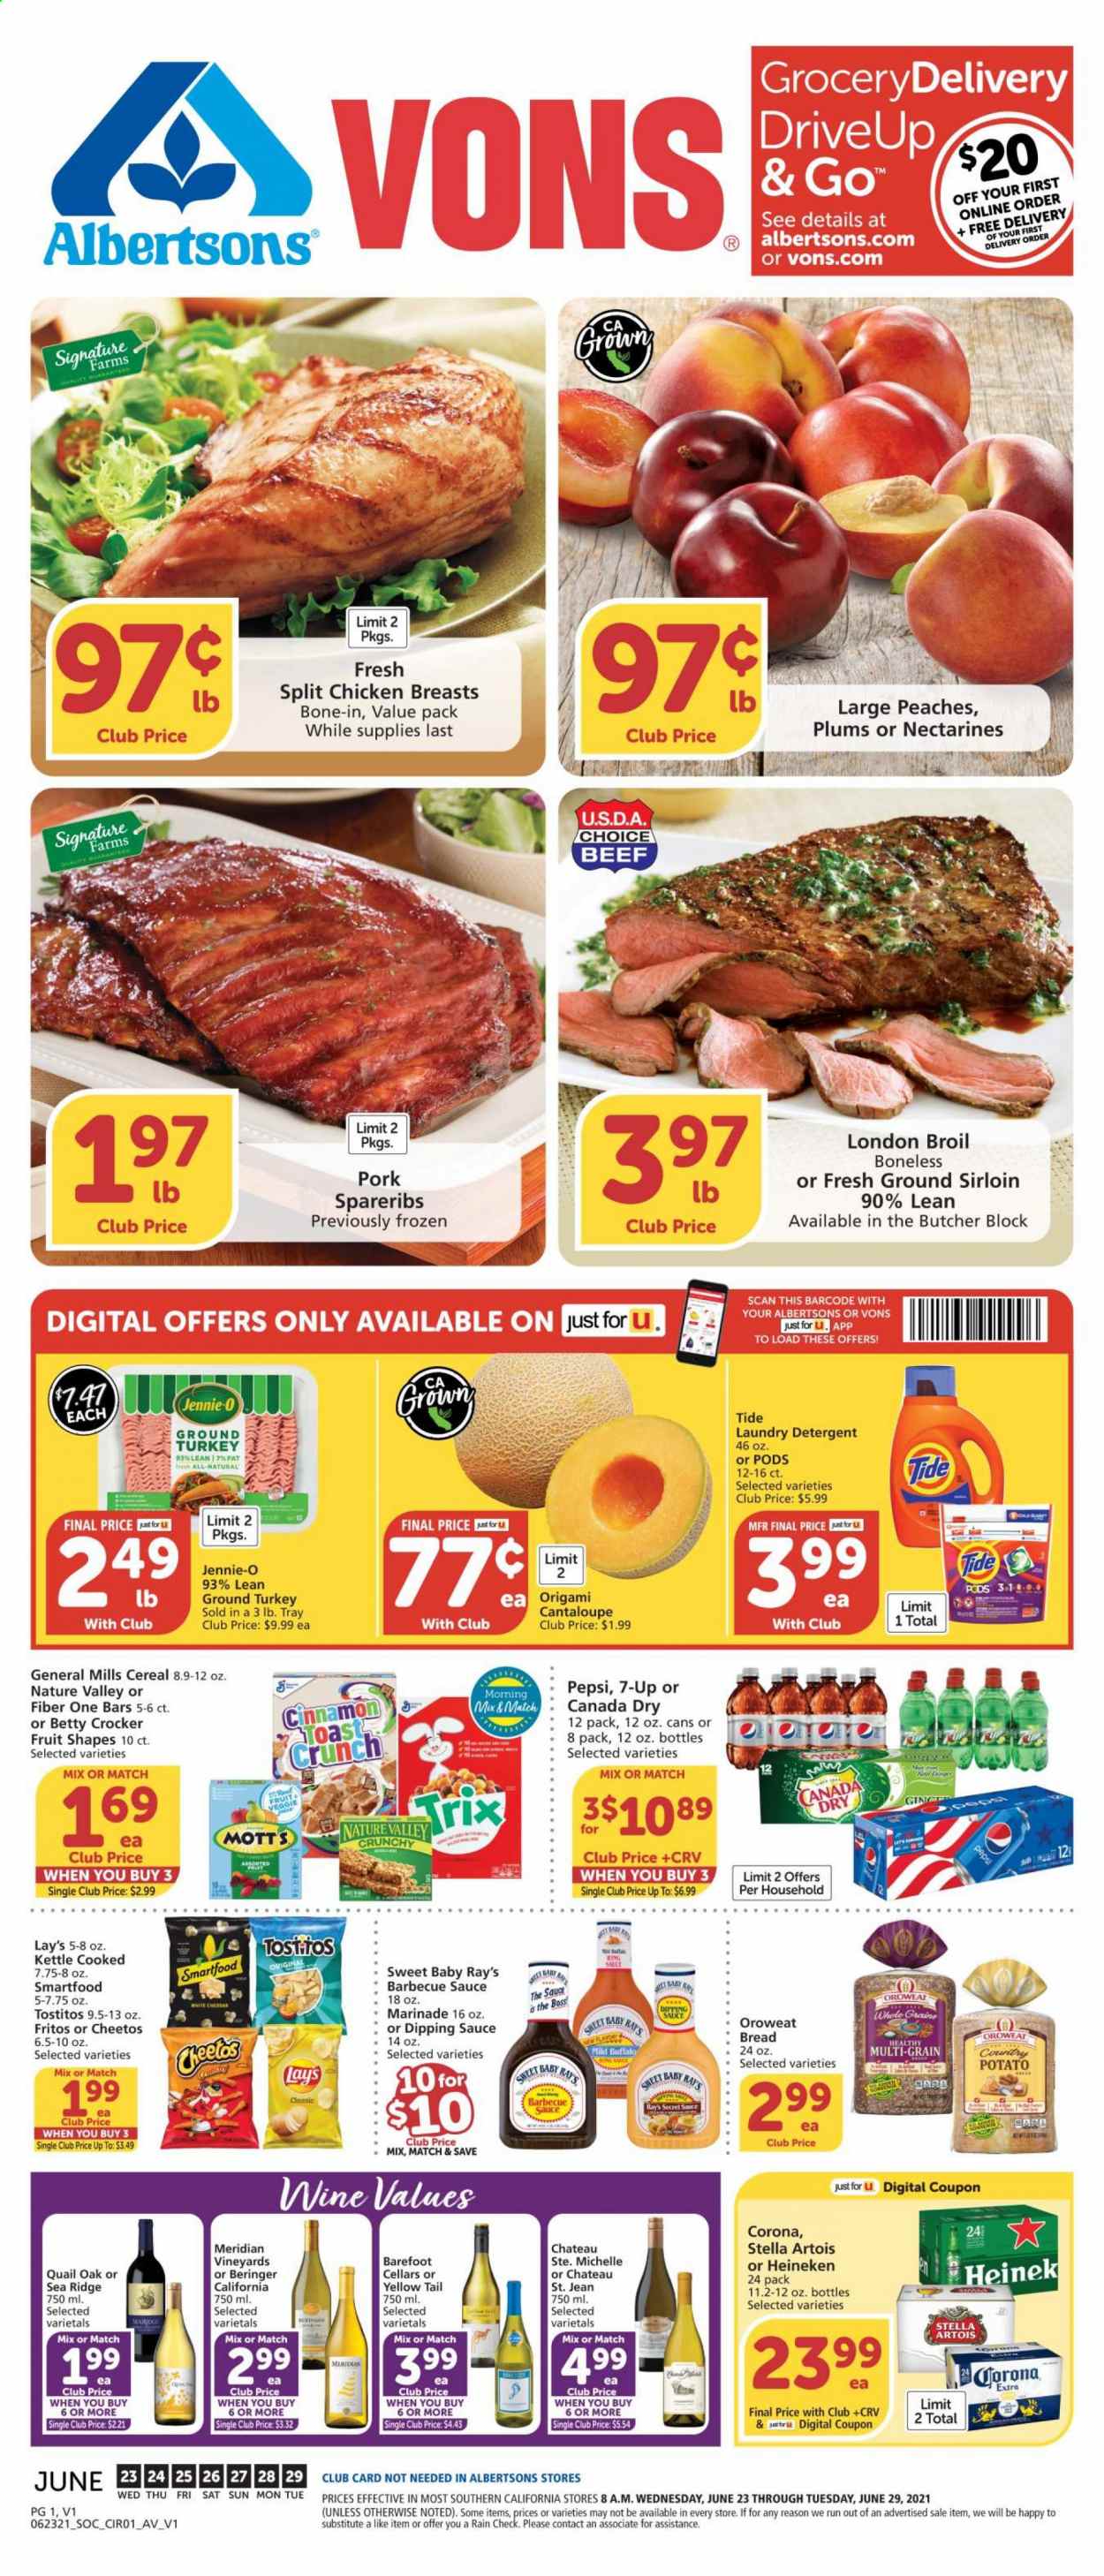 thumbnail - Vons Flyer - 06/23/2021 - 06/29/2021 - Sales products - plums, bread, cantaloupe, ginger, Mott's, ground turkey, chicken breasts, pork spare ribs, Fritos, Cheetos, Lay’s, Smartfood, Tostitos, cereals, Trix, Nature Valley, Fiber One, cinnamon, BBQ sauce, marinade, wing sauce, Canada Dry, Pepsi, 7UP, Quail Oak, beer, Stella Artois, Corona Extra, Heineken, detergent, Tide, laundry detergent, tray, nectarines, peaches. Page 1.